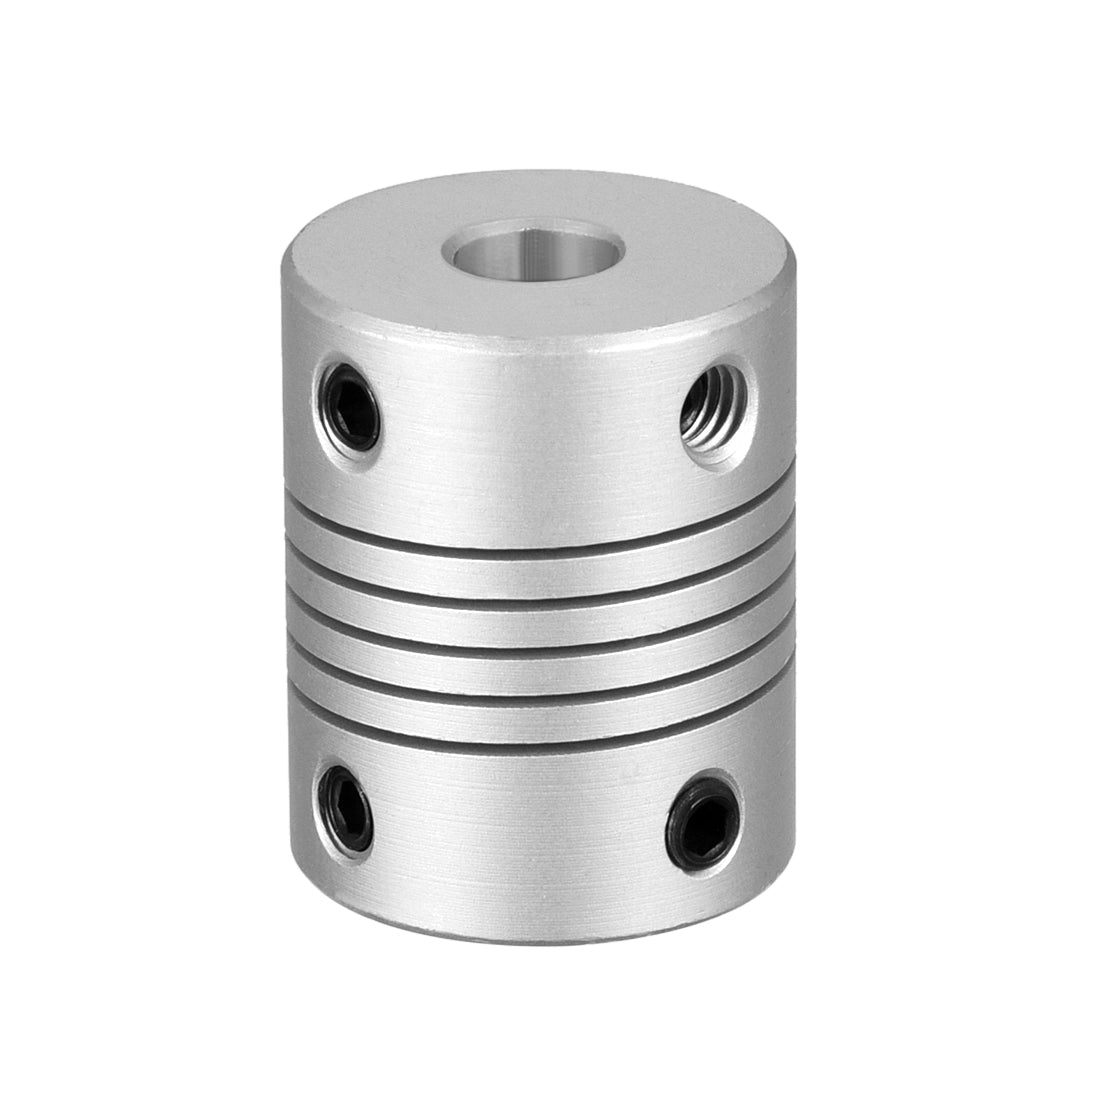 uxcell Uxcell 6.35mm to 6.35mm Aluminum Alloy Shaft Coupling Flexible Coupler Motor Connector Joint L25xD19 Silver